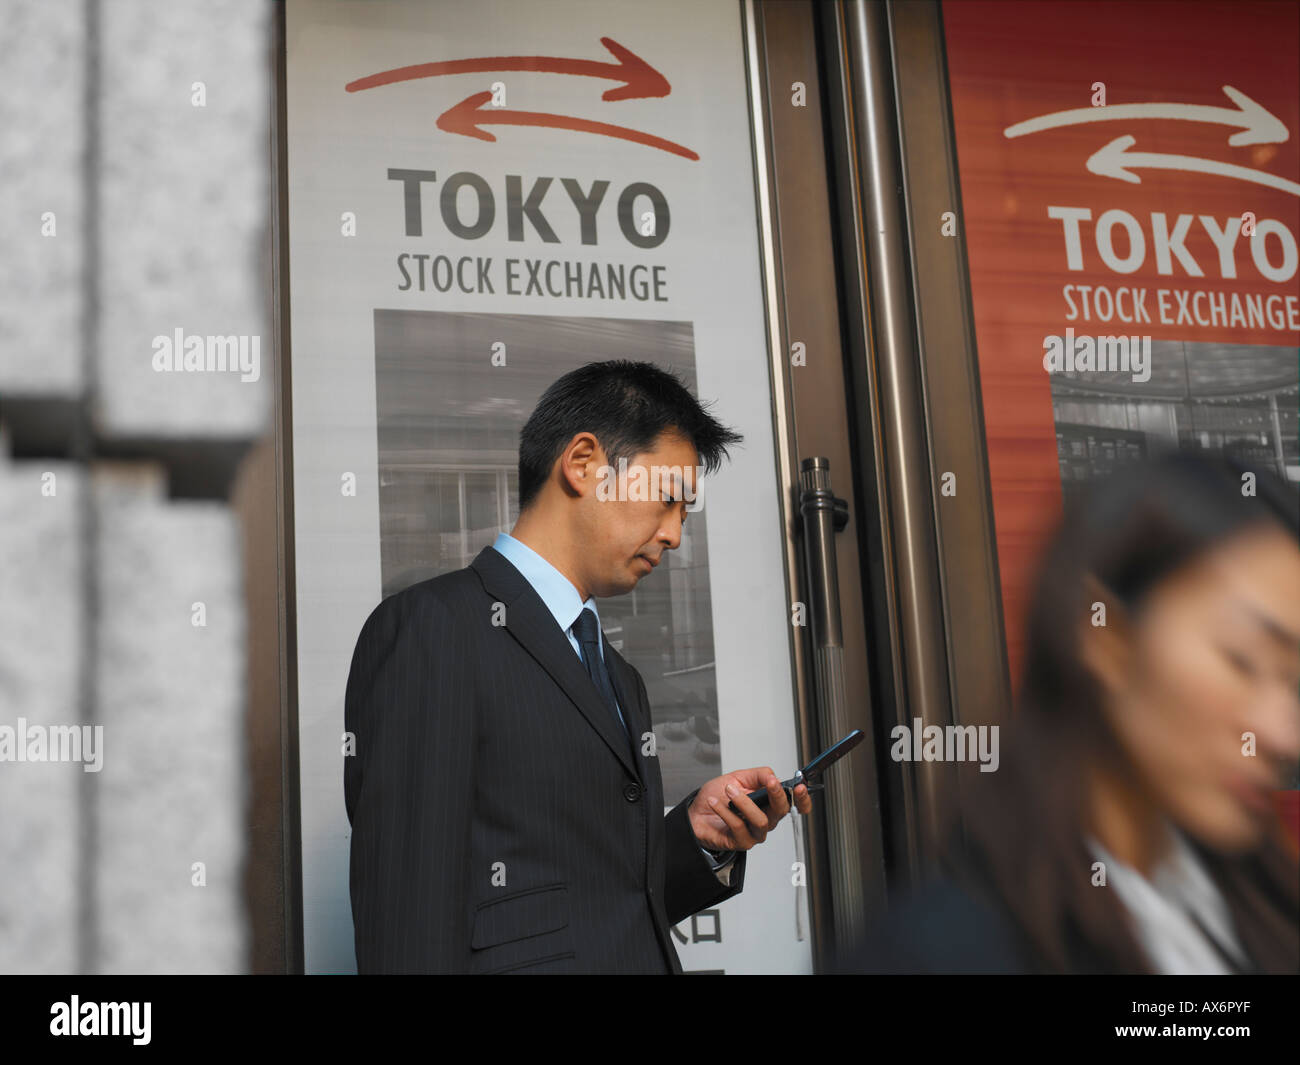 A Japanese businessman with mobile phone outside the Tokyo stock exchange dials a number while other business people pass in fro Stock Photo